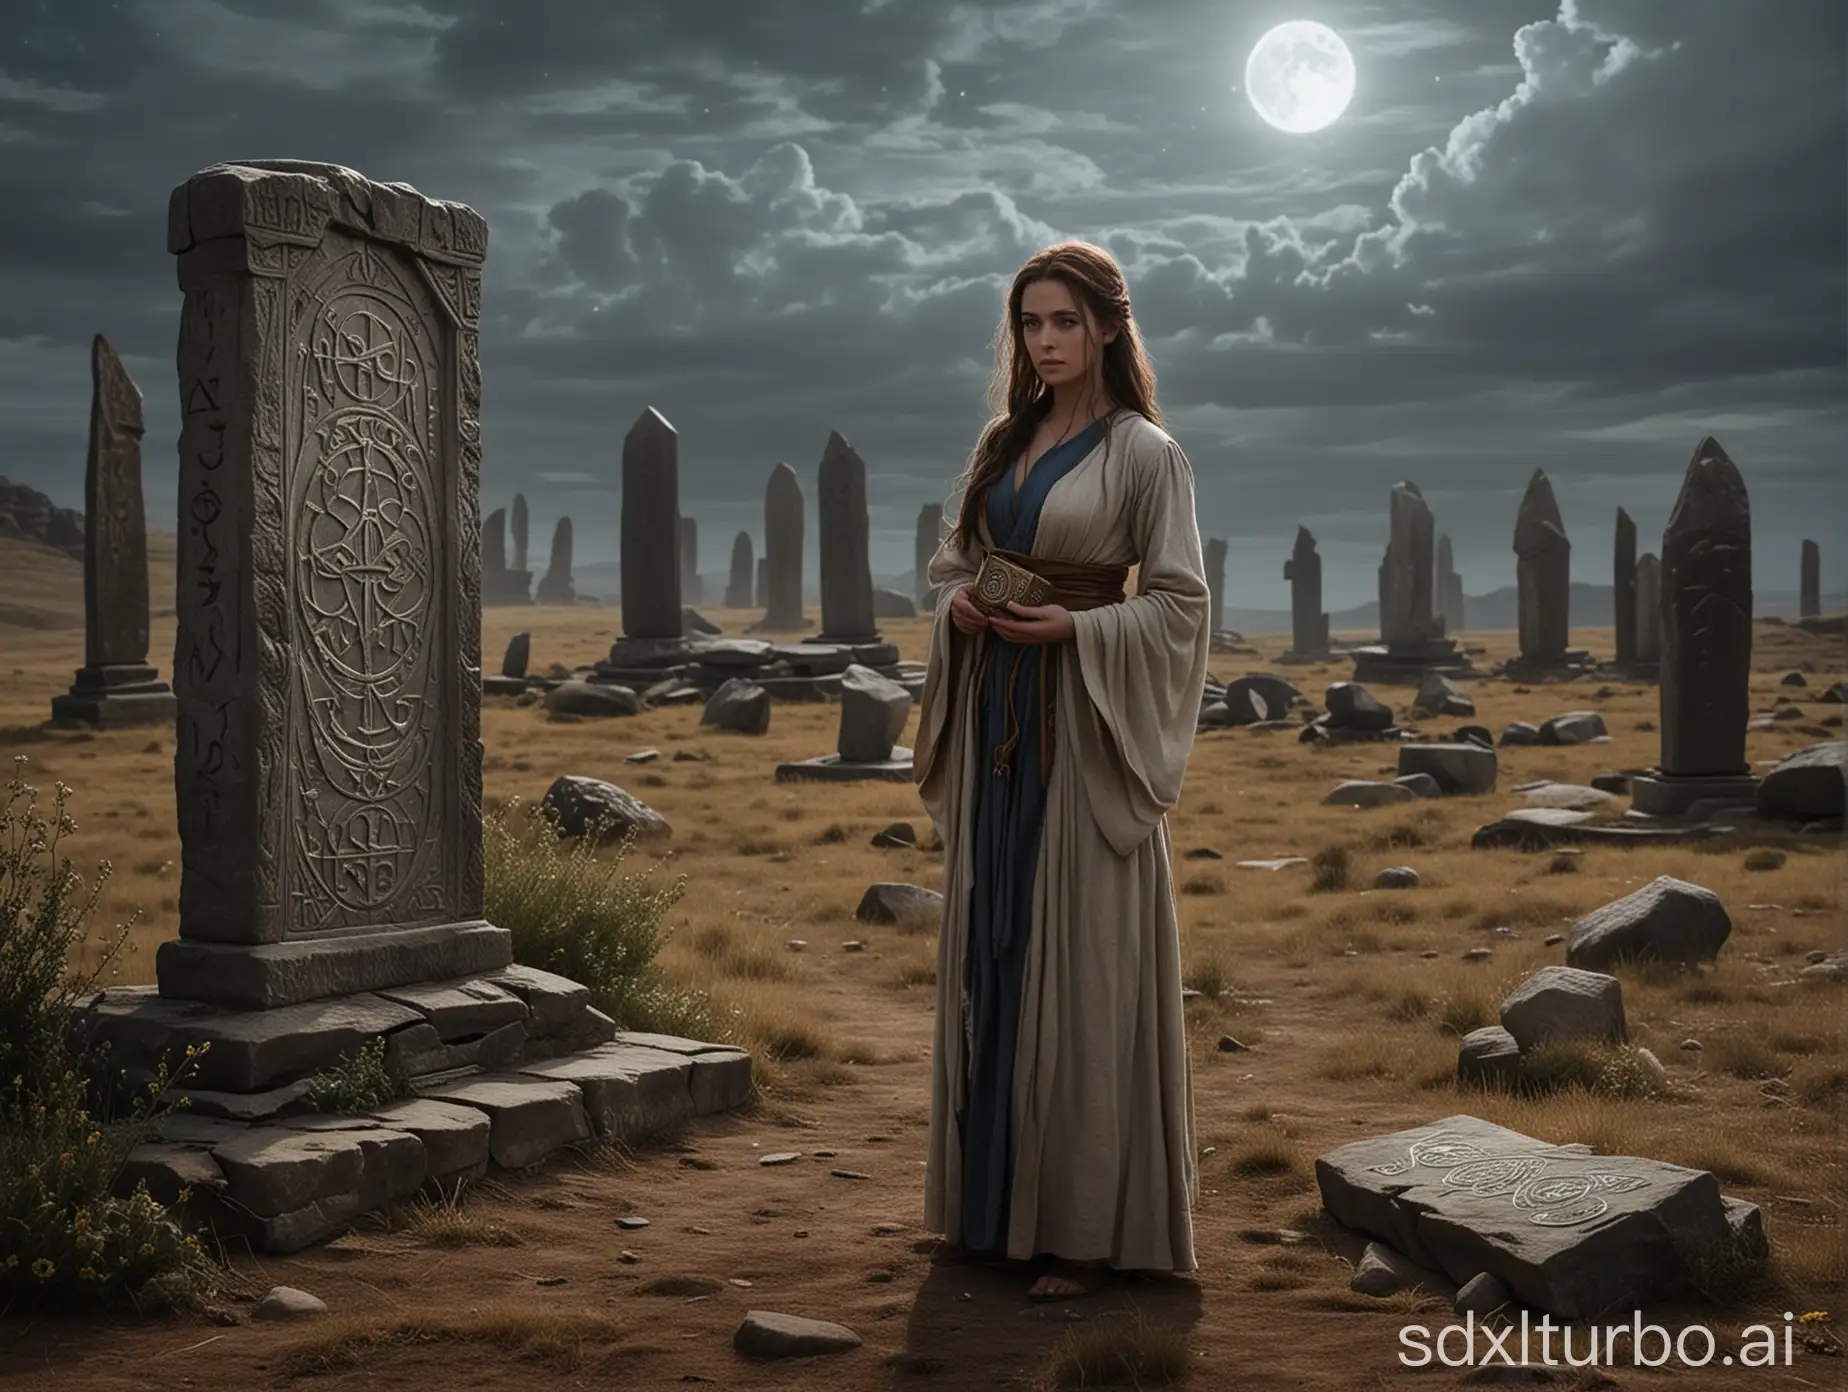 In a desolate and mysterious wasteland, the young sorceress Aria stands before an ancient stone stele inscribed with runes. Her eyes sparkle with curiosity for the unknown and determination for her mission. She has just deciphered a prophecy that guides her to seek the legendary "Guardian of Light," who is said to be the only one capable of reigniting the Well of Aether and restoring the power of magic. Aria clutches a yellowed spellbook in her hand, dressed in a robe adorned with mystical symbols that flutter in the wind, ready to embark on the journey to find the guardian. At her feet, the ruins hint at ancient magical remnants, such as broken pillars and weathered magical circles, which glimmer faintly under the moonlight, as if narrating past glories. The entire scene should convey an atmosphere that is mysterious, ancient, and full of hope, while also capturing Aria's anticipation and resolve for the journey.